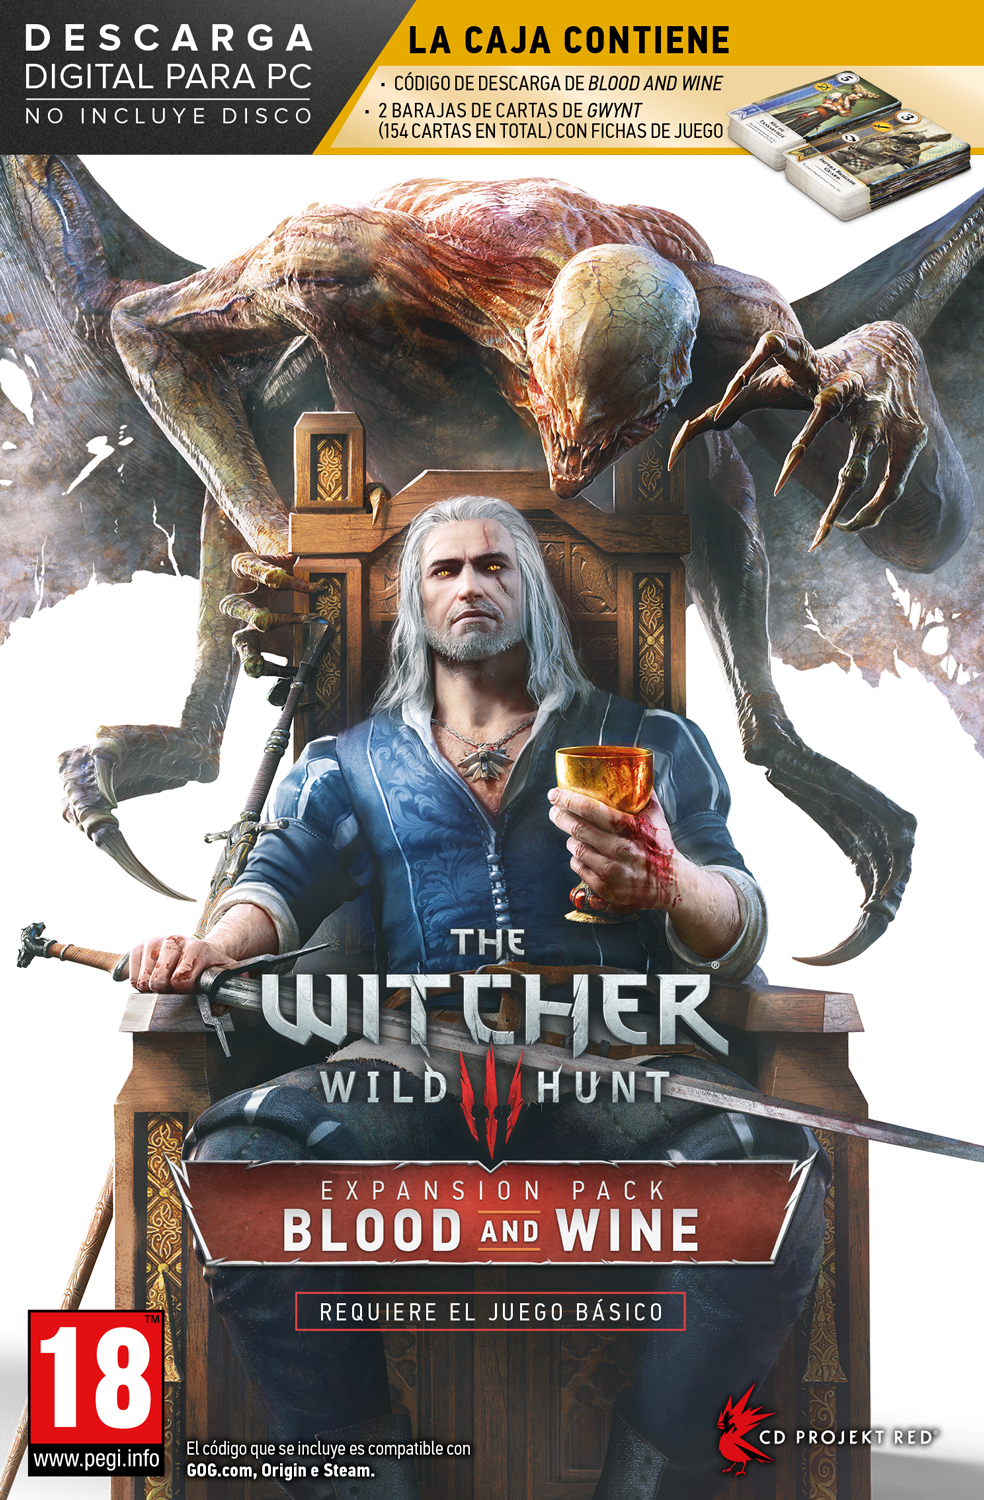 The Witcher III: Wild Hunt - Blood and Wine